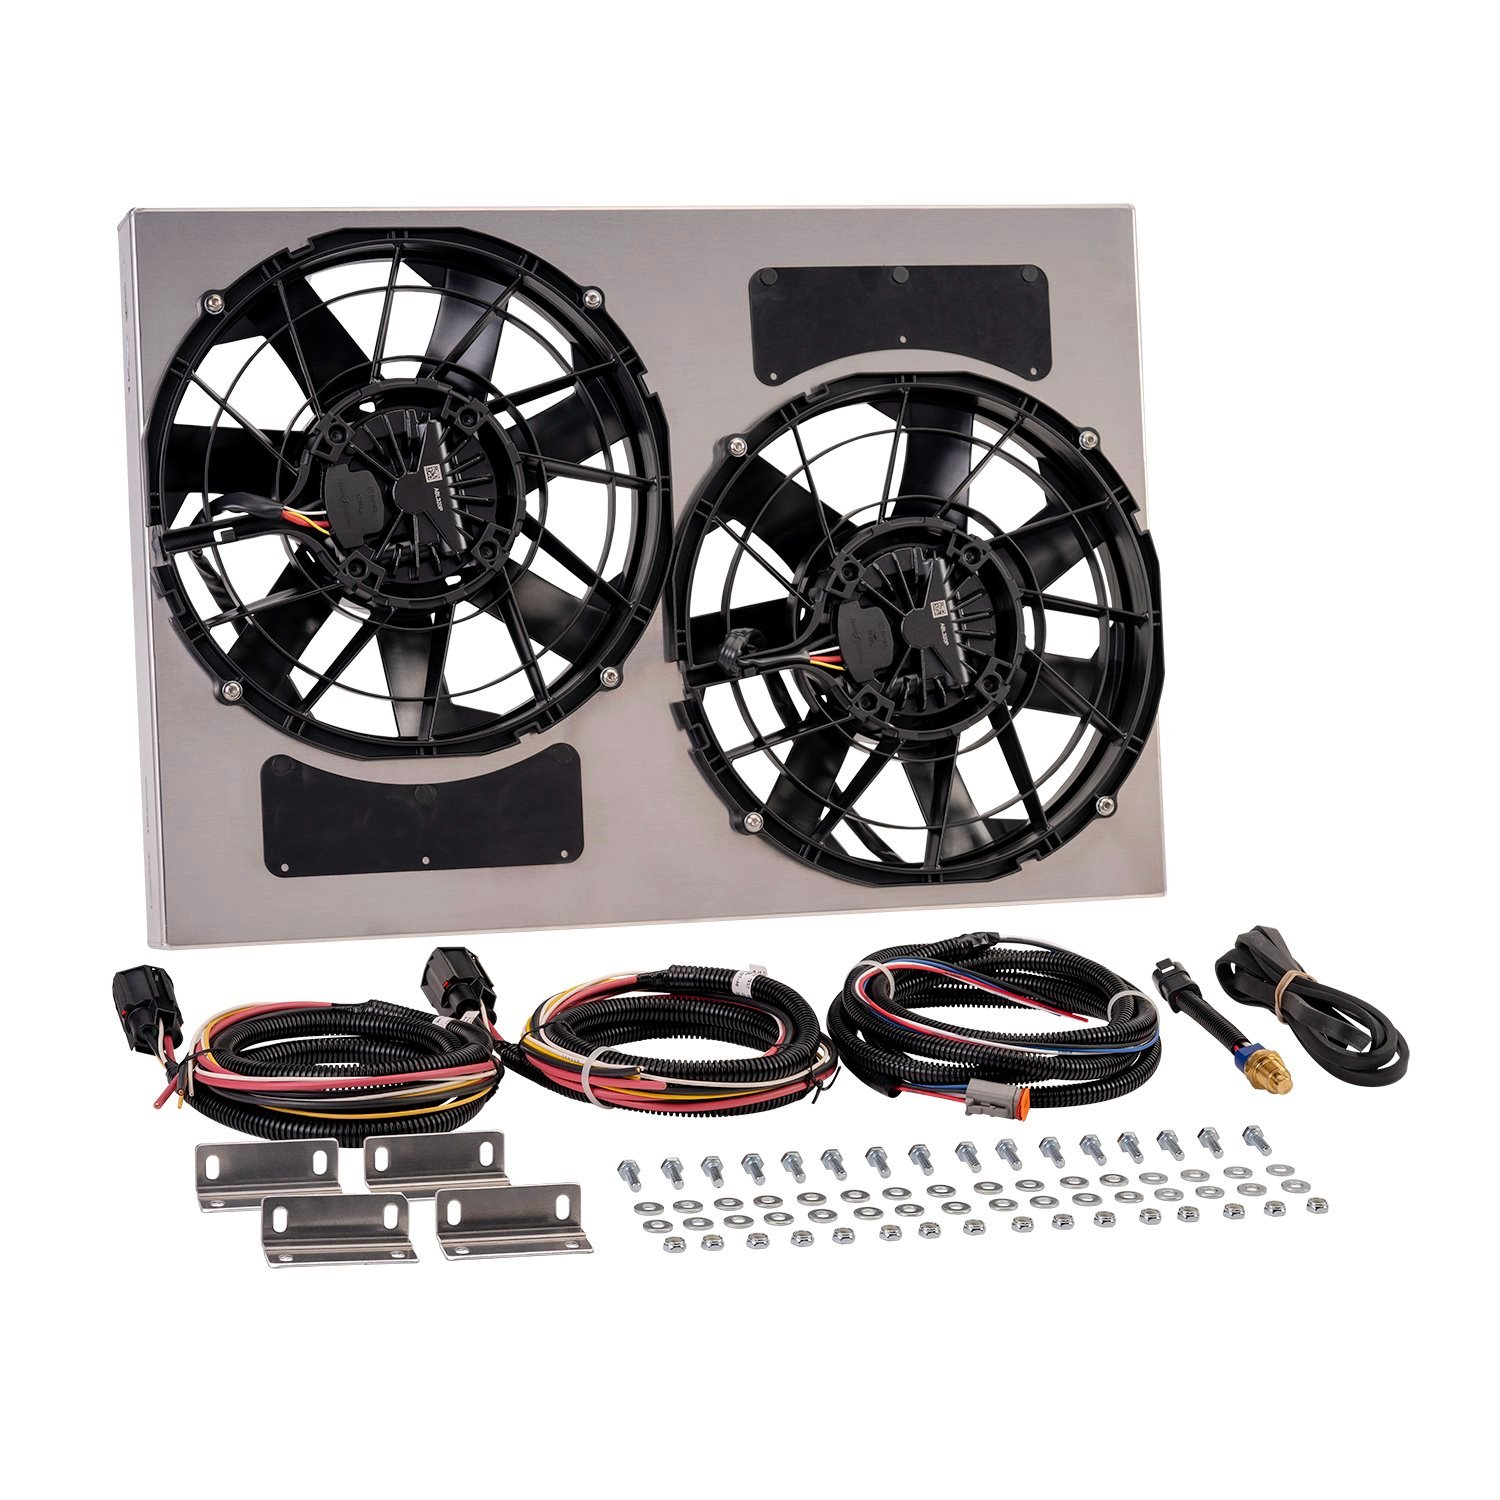 67942-195 Brushless Dual Powerpack 12 in. Radiator Fan Assembly with Integrated 195 Degree PWM Controller